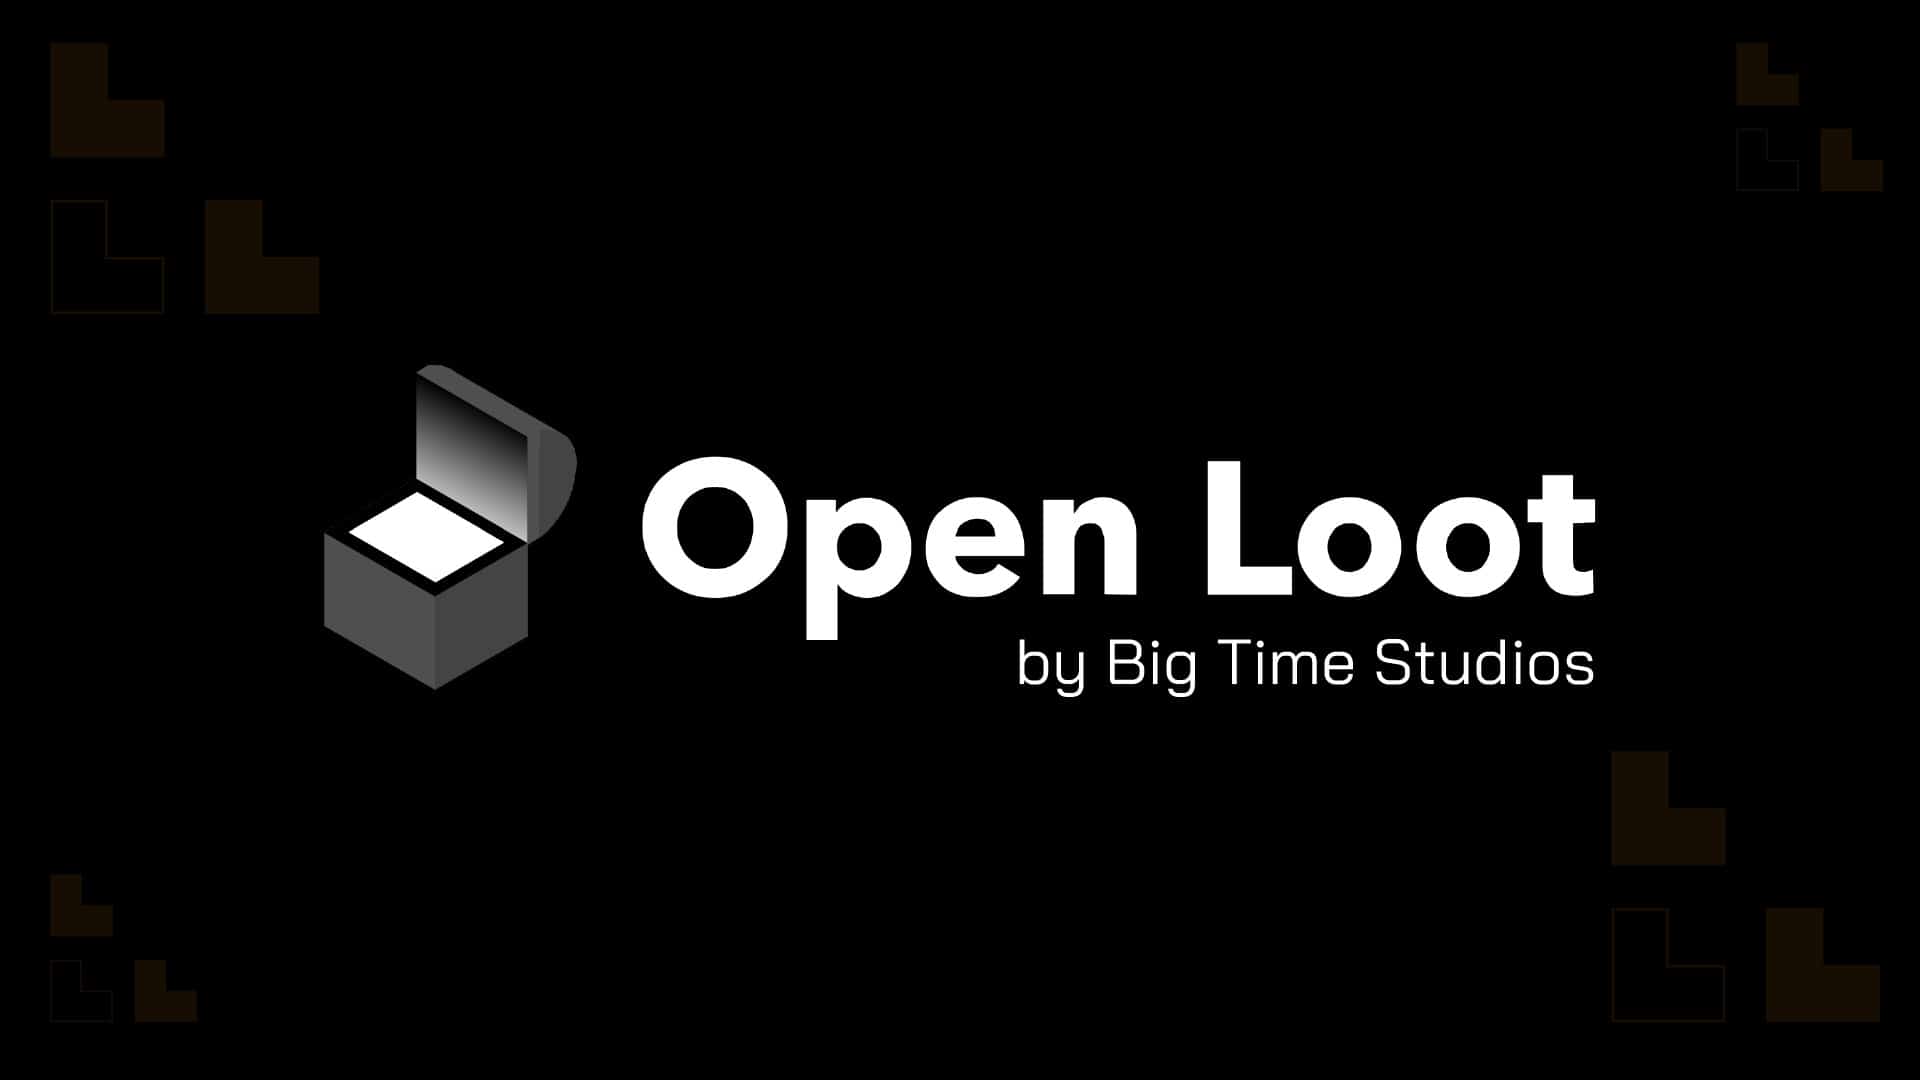 Big Time Studios Announces OPEN LOOT Platform and Gaming Fund